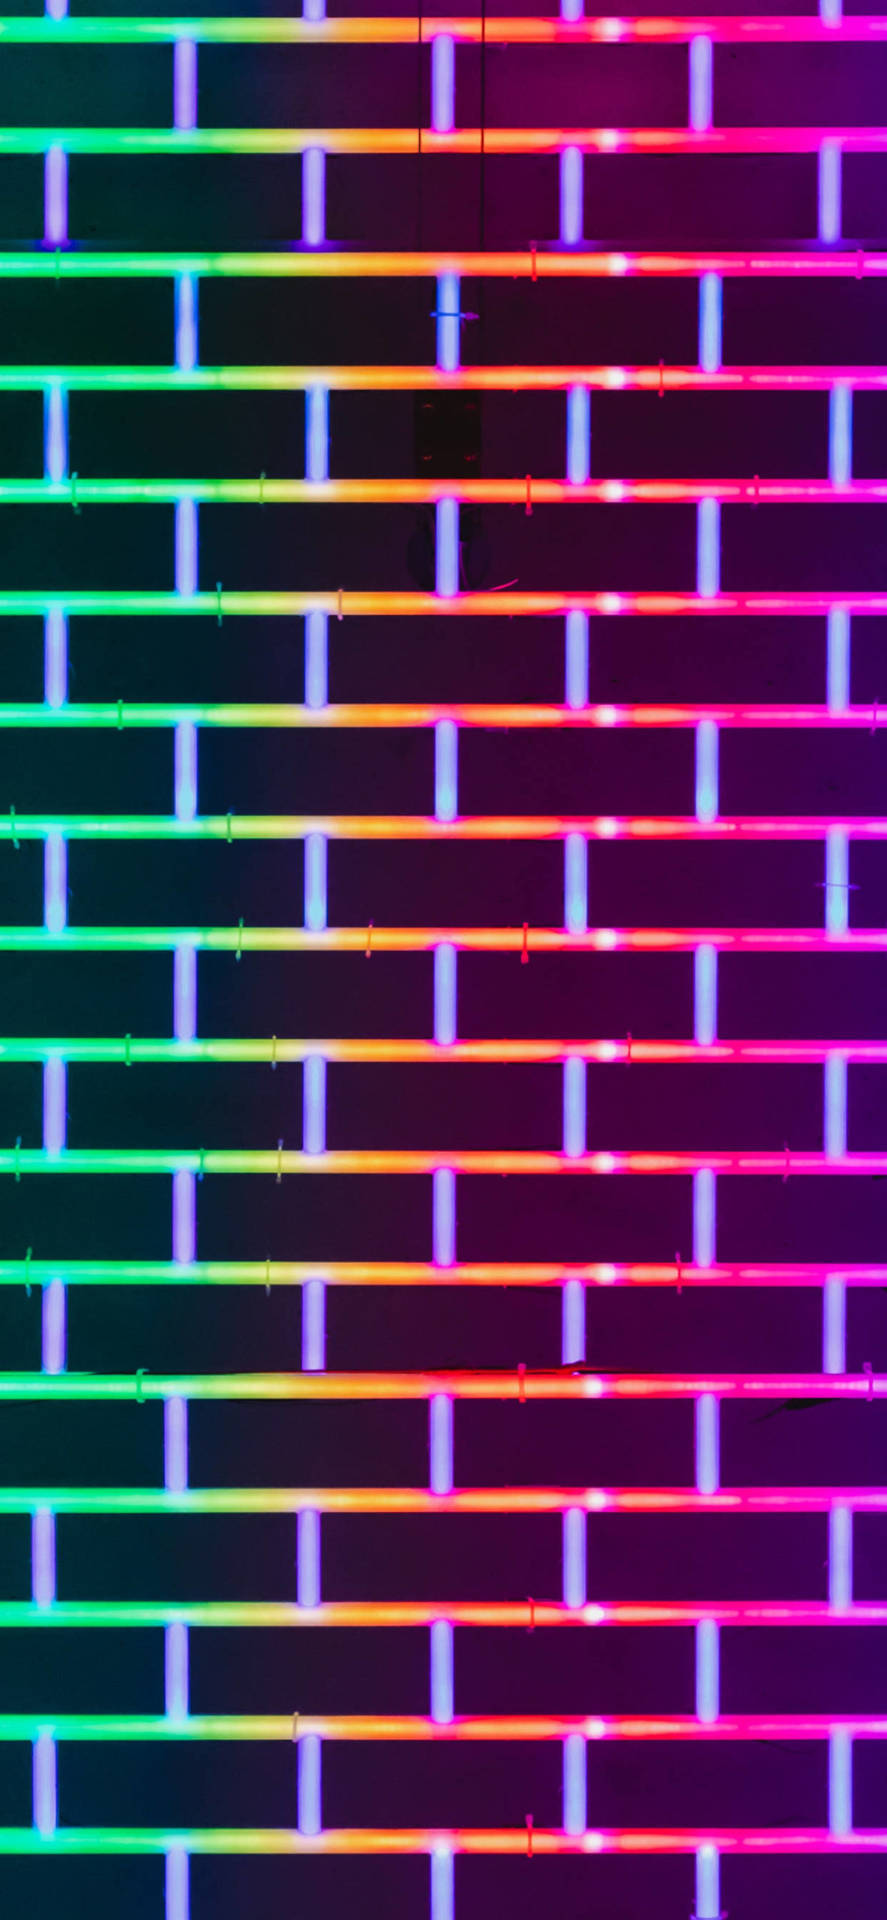 384993 background, wall, brick, side 4k - Rare Gallery HD Wallpapers